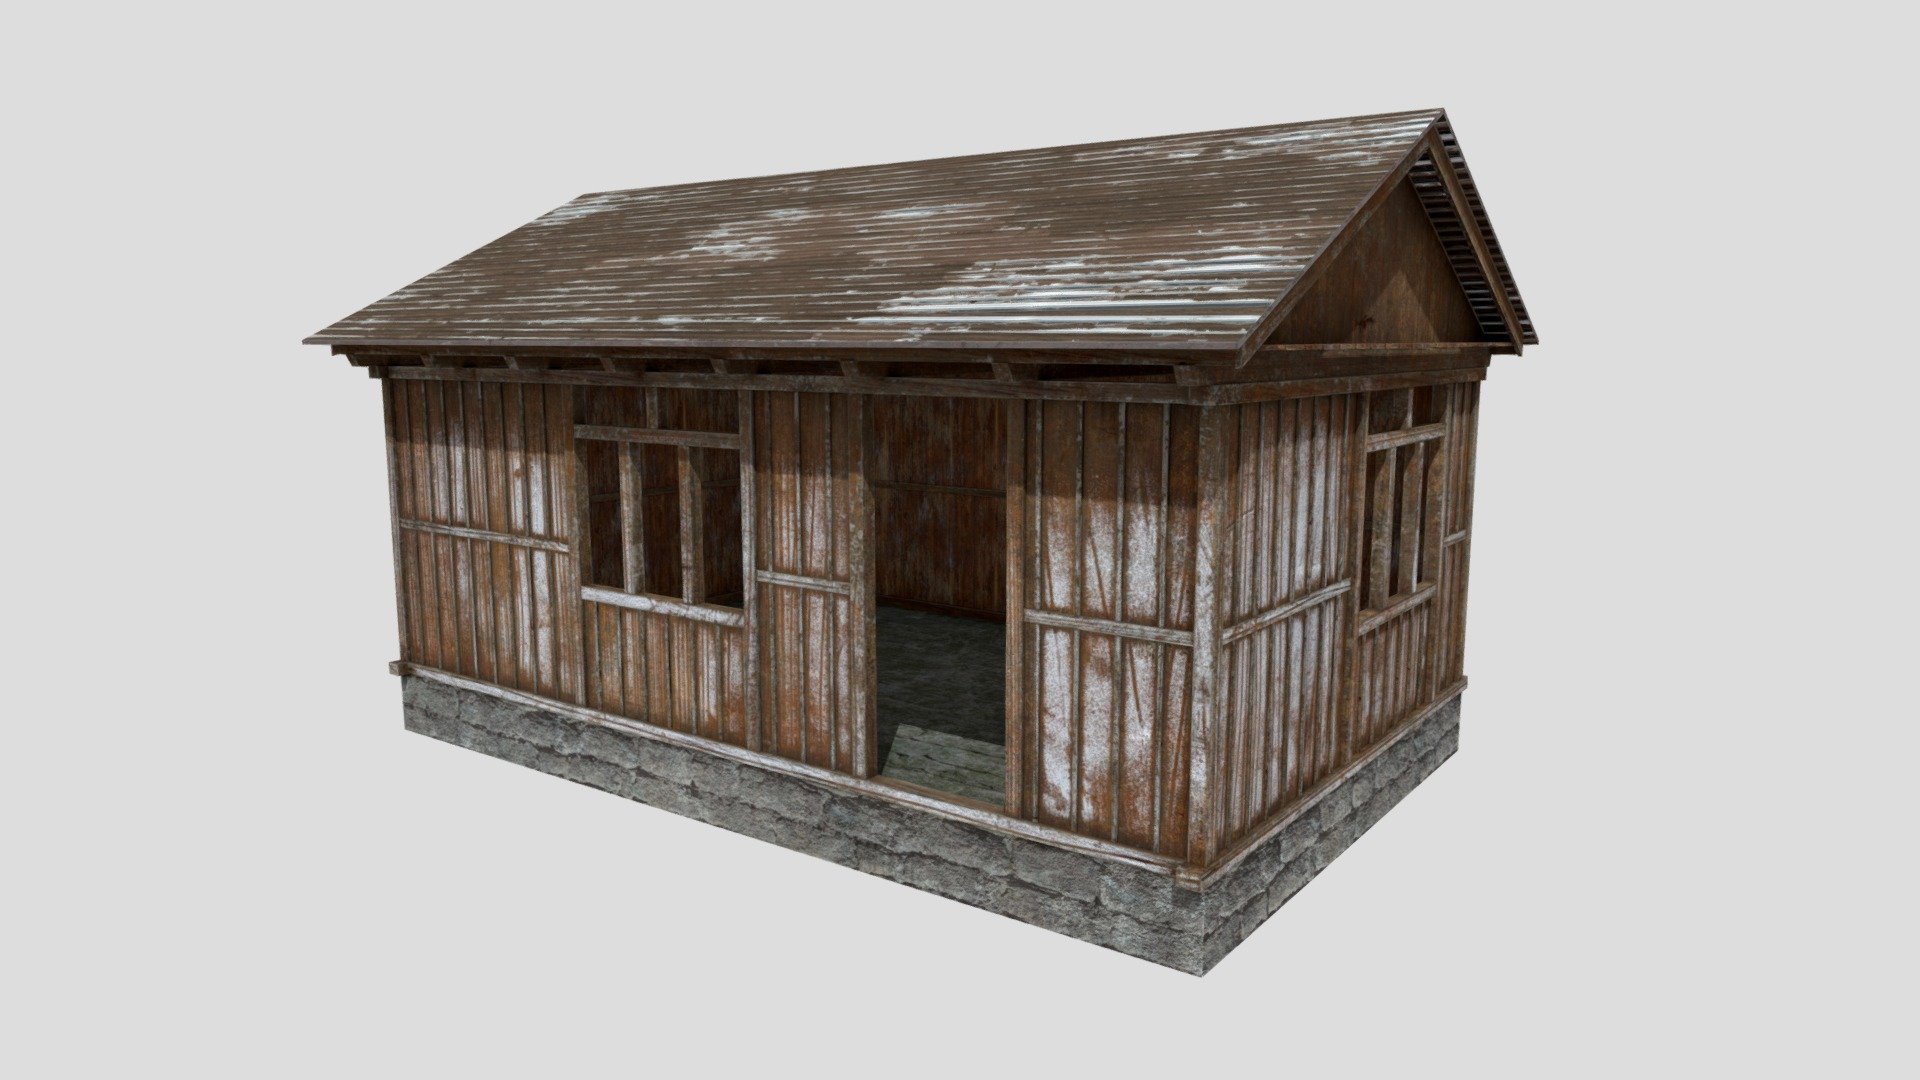 A small wooden shed with an enterable interior. Consists of two PBR materials with non-overlapping UVs . Works great in any modern game engine or for rendering purposes. Available in: **fbx, obj, blend, dae, gltf, Unreal project and Unity package. **

Textures are in 4096x4096 resolution:




Diffuse/Base colour

Roughness

Metallic

Normal map

Ambient Occlusion

Unity and Unreal packages include drag and drop prefabs with packed textures.
Textures were created in, and exported from, Substance Painter.
Model created with, and native to, Blender 2.92 - Wooden Shack - Buy Royalty Free 3D model by HowardCoates 3d model